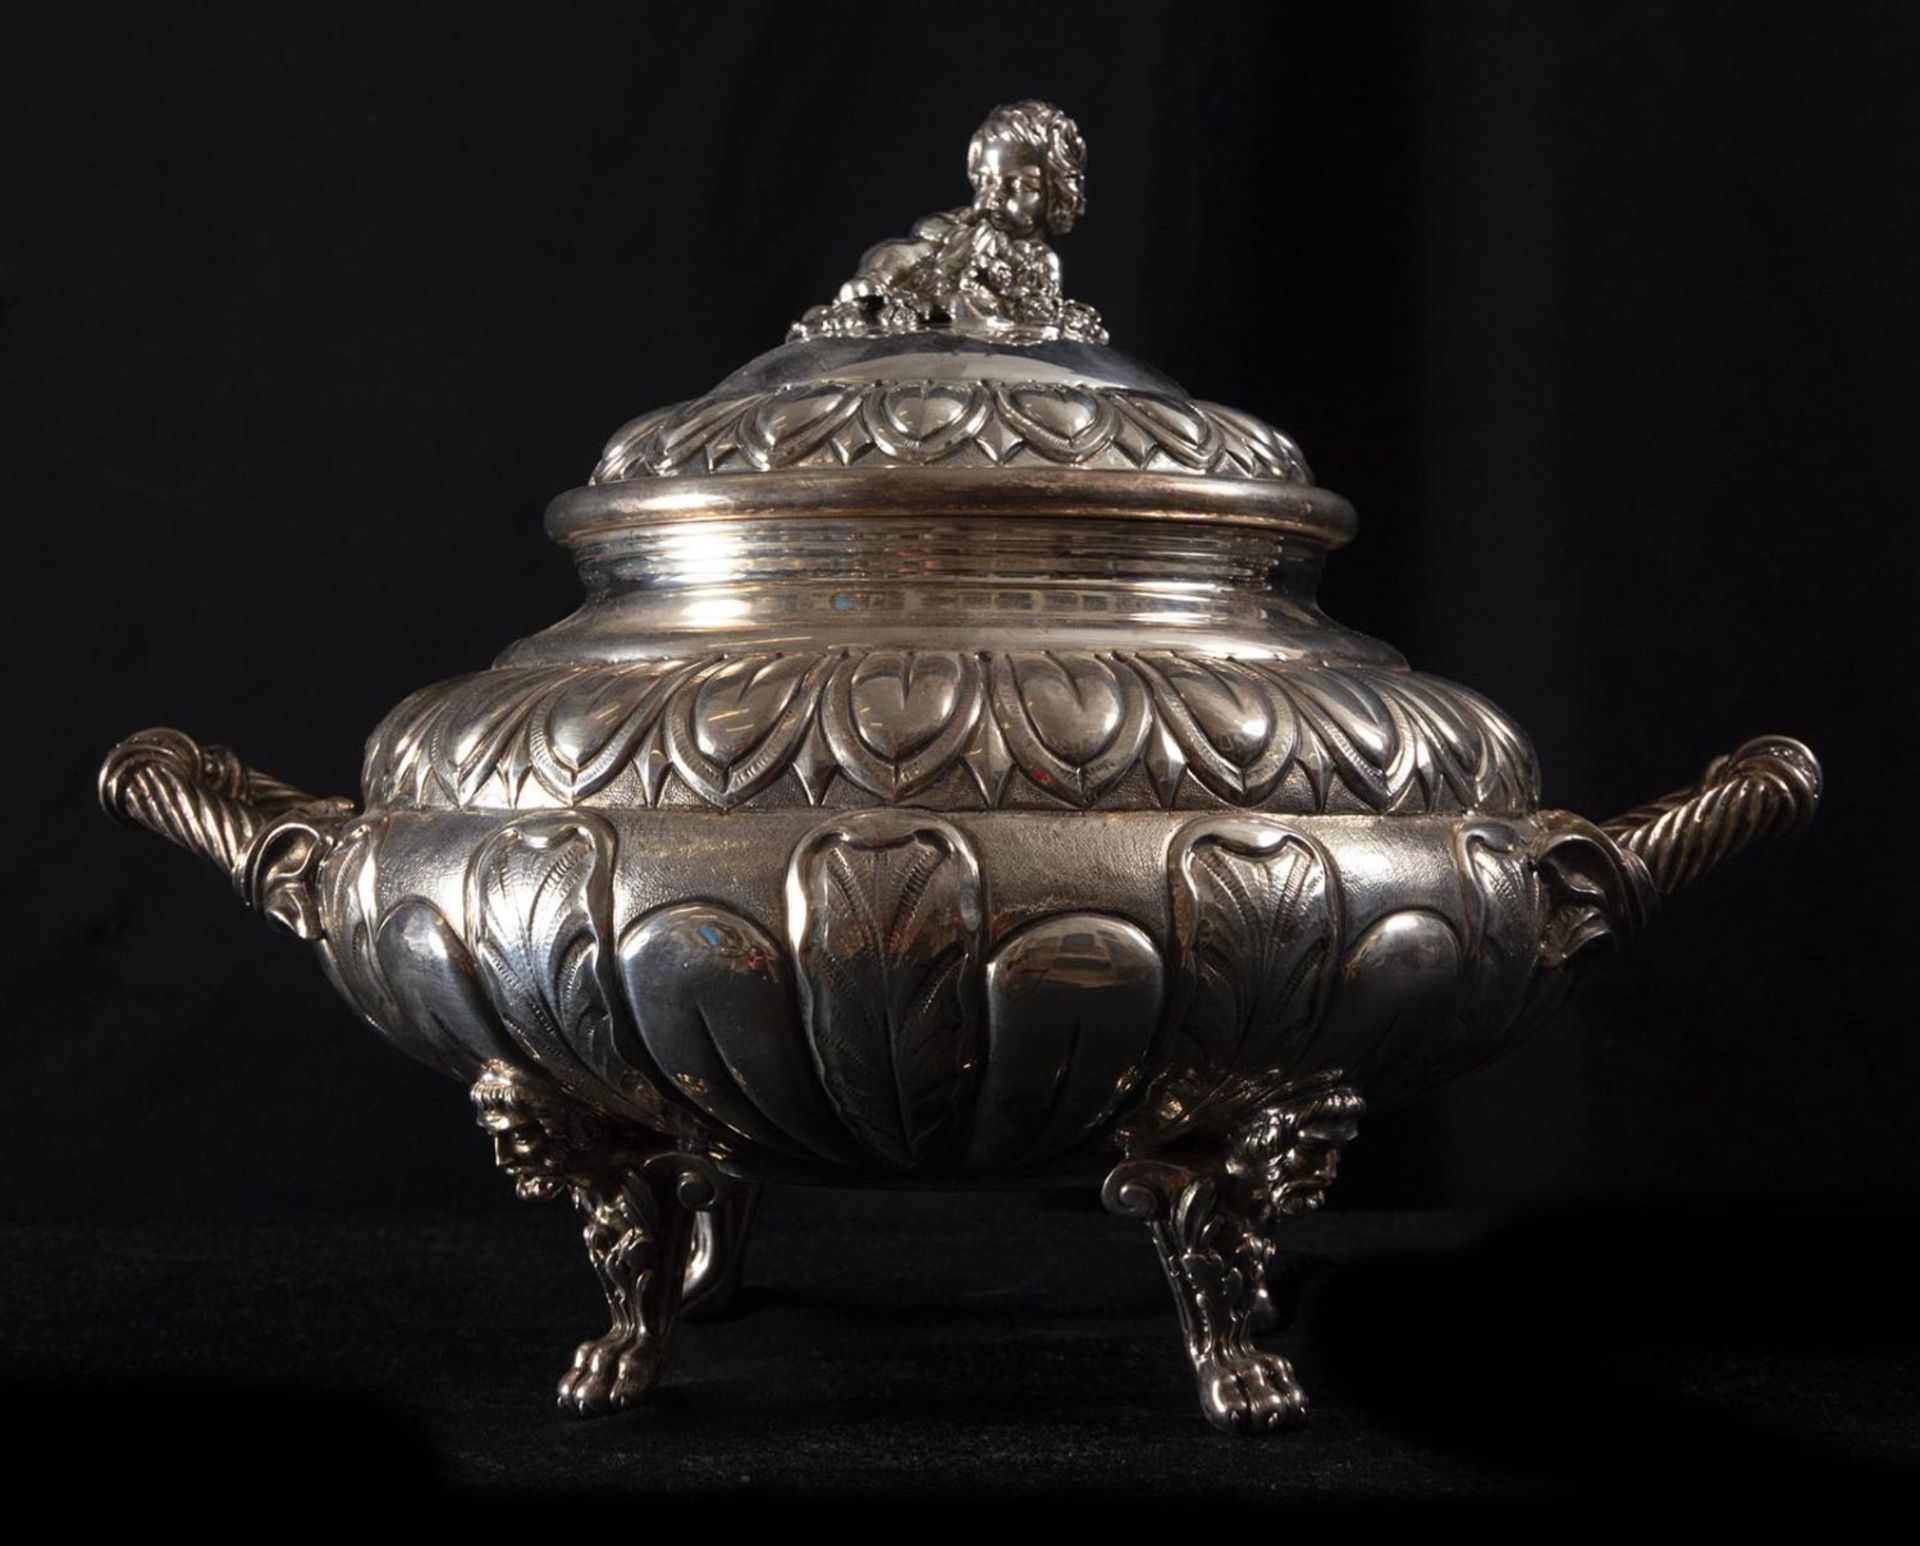 Elegant French tureen with Cherub-shaped lid and faun legs, 19th century, in 925 Sterling silver